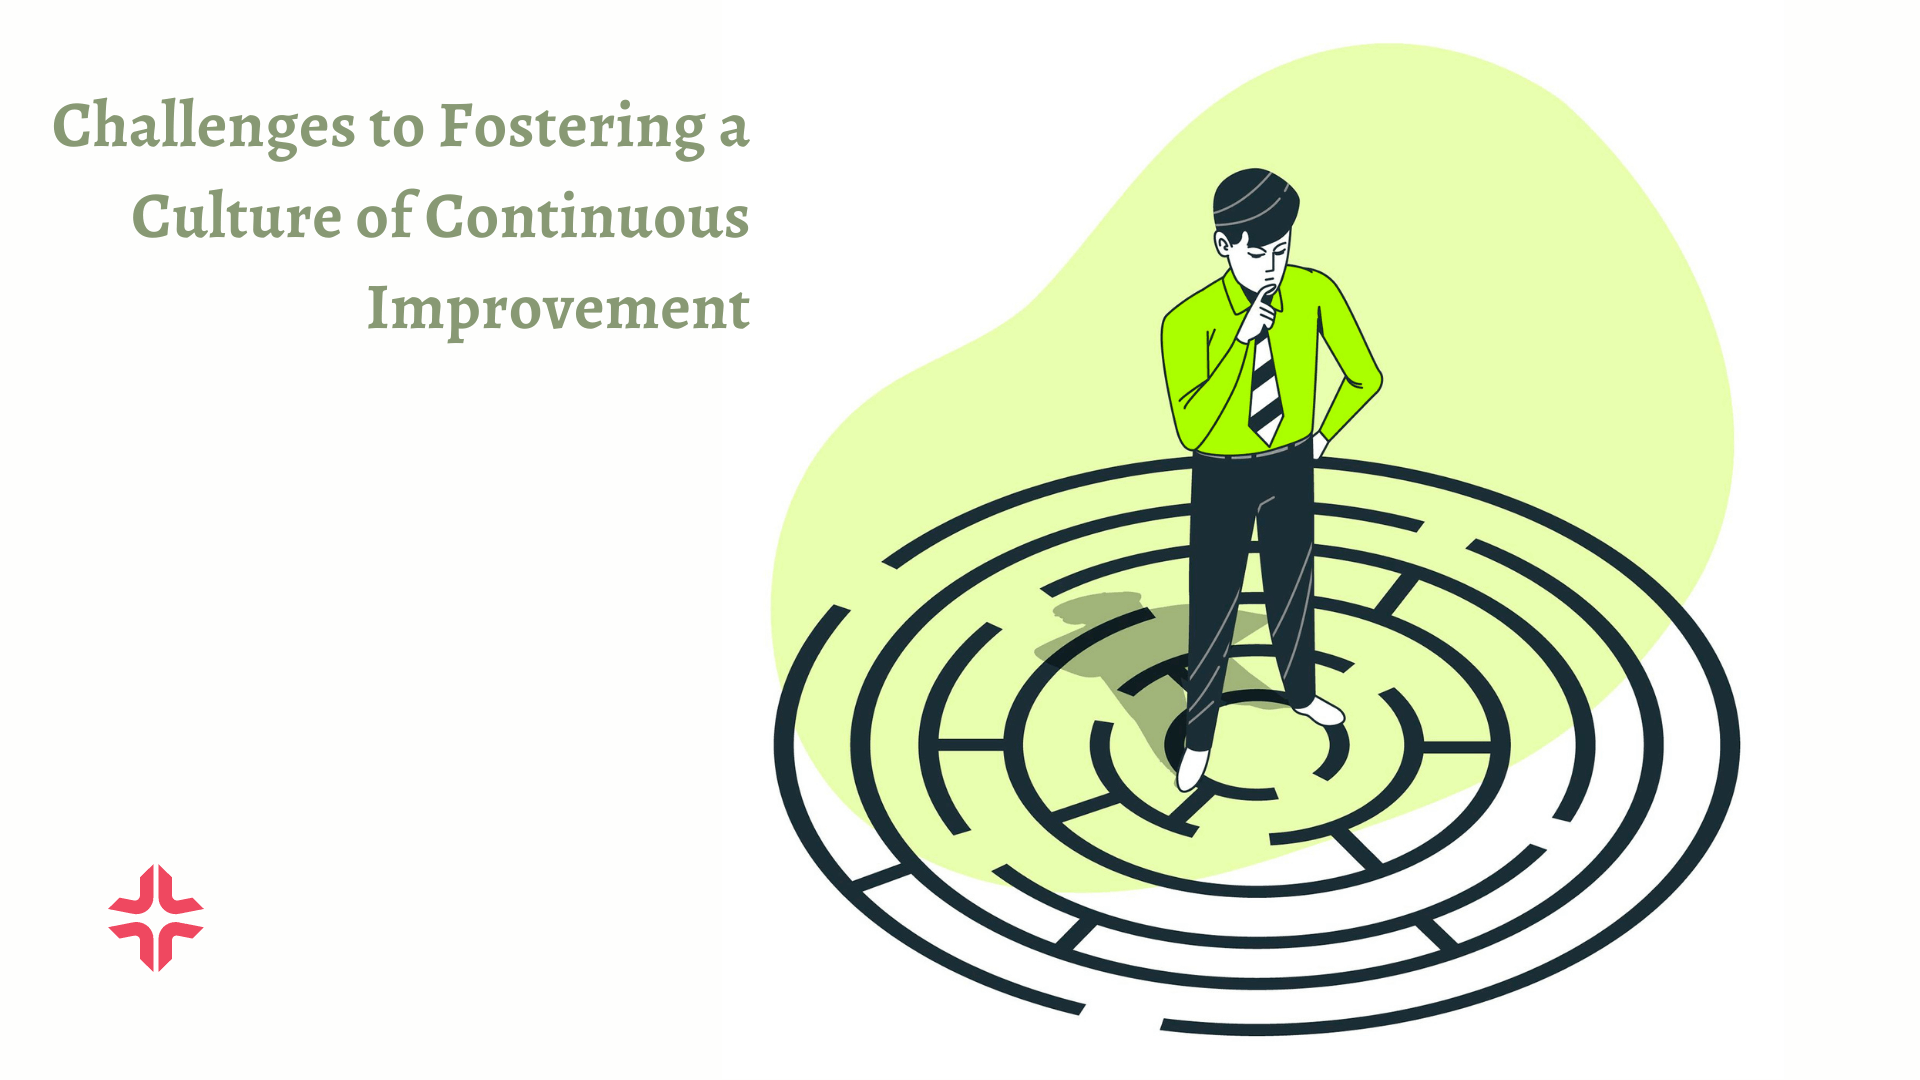 Challenges to Fostering a Culture of Continuous Improvement